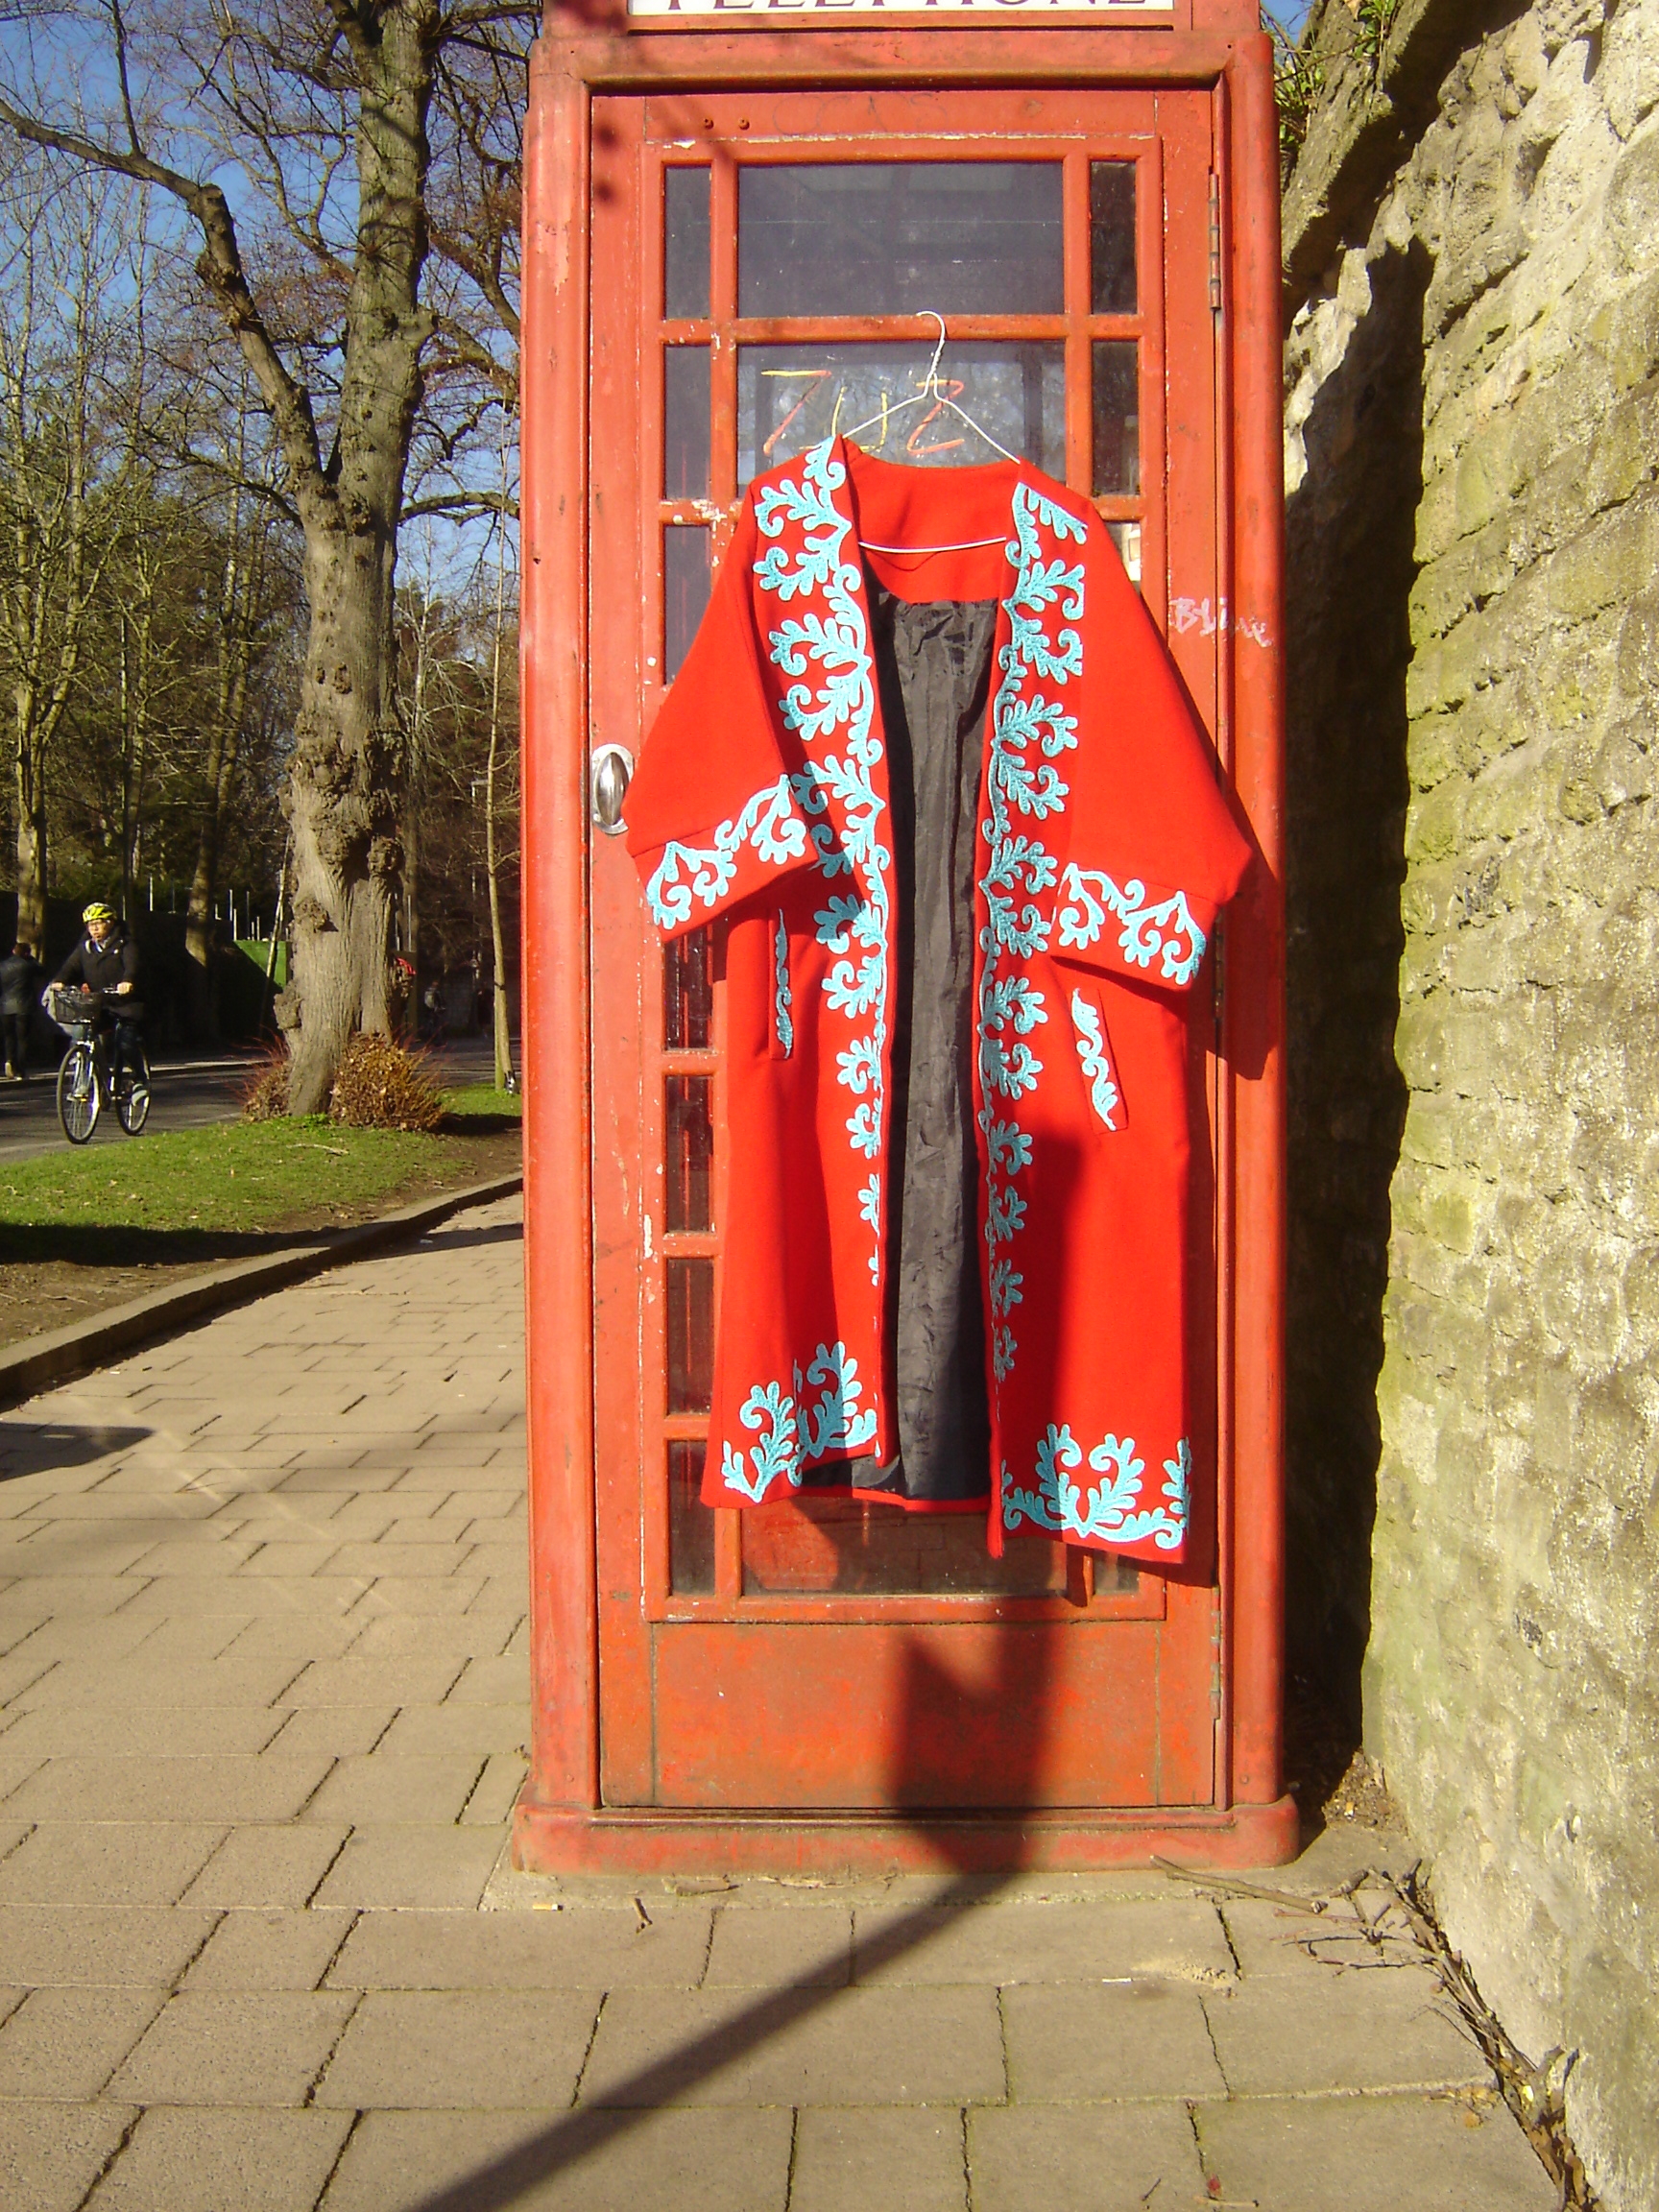 Splendid red full-length coat with turquoise embroidery